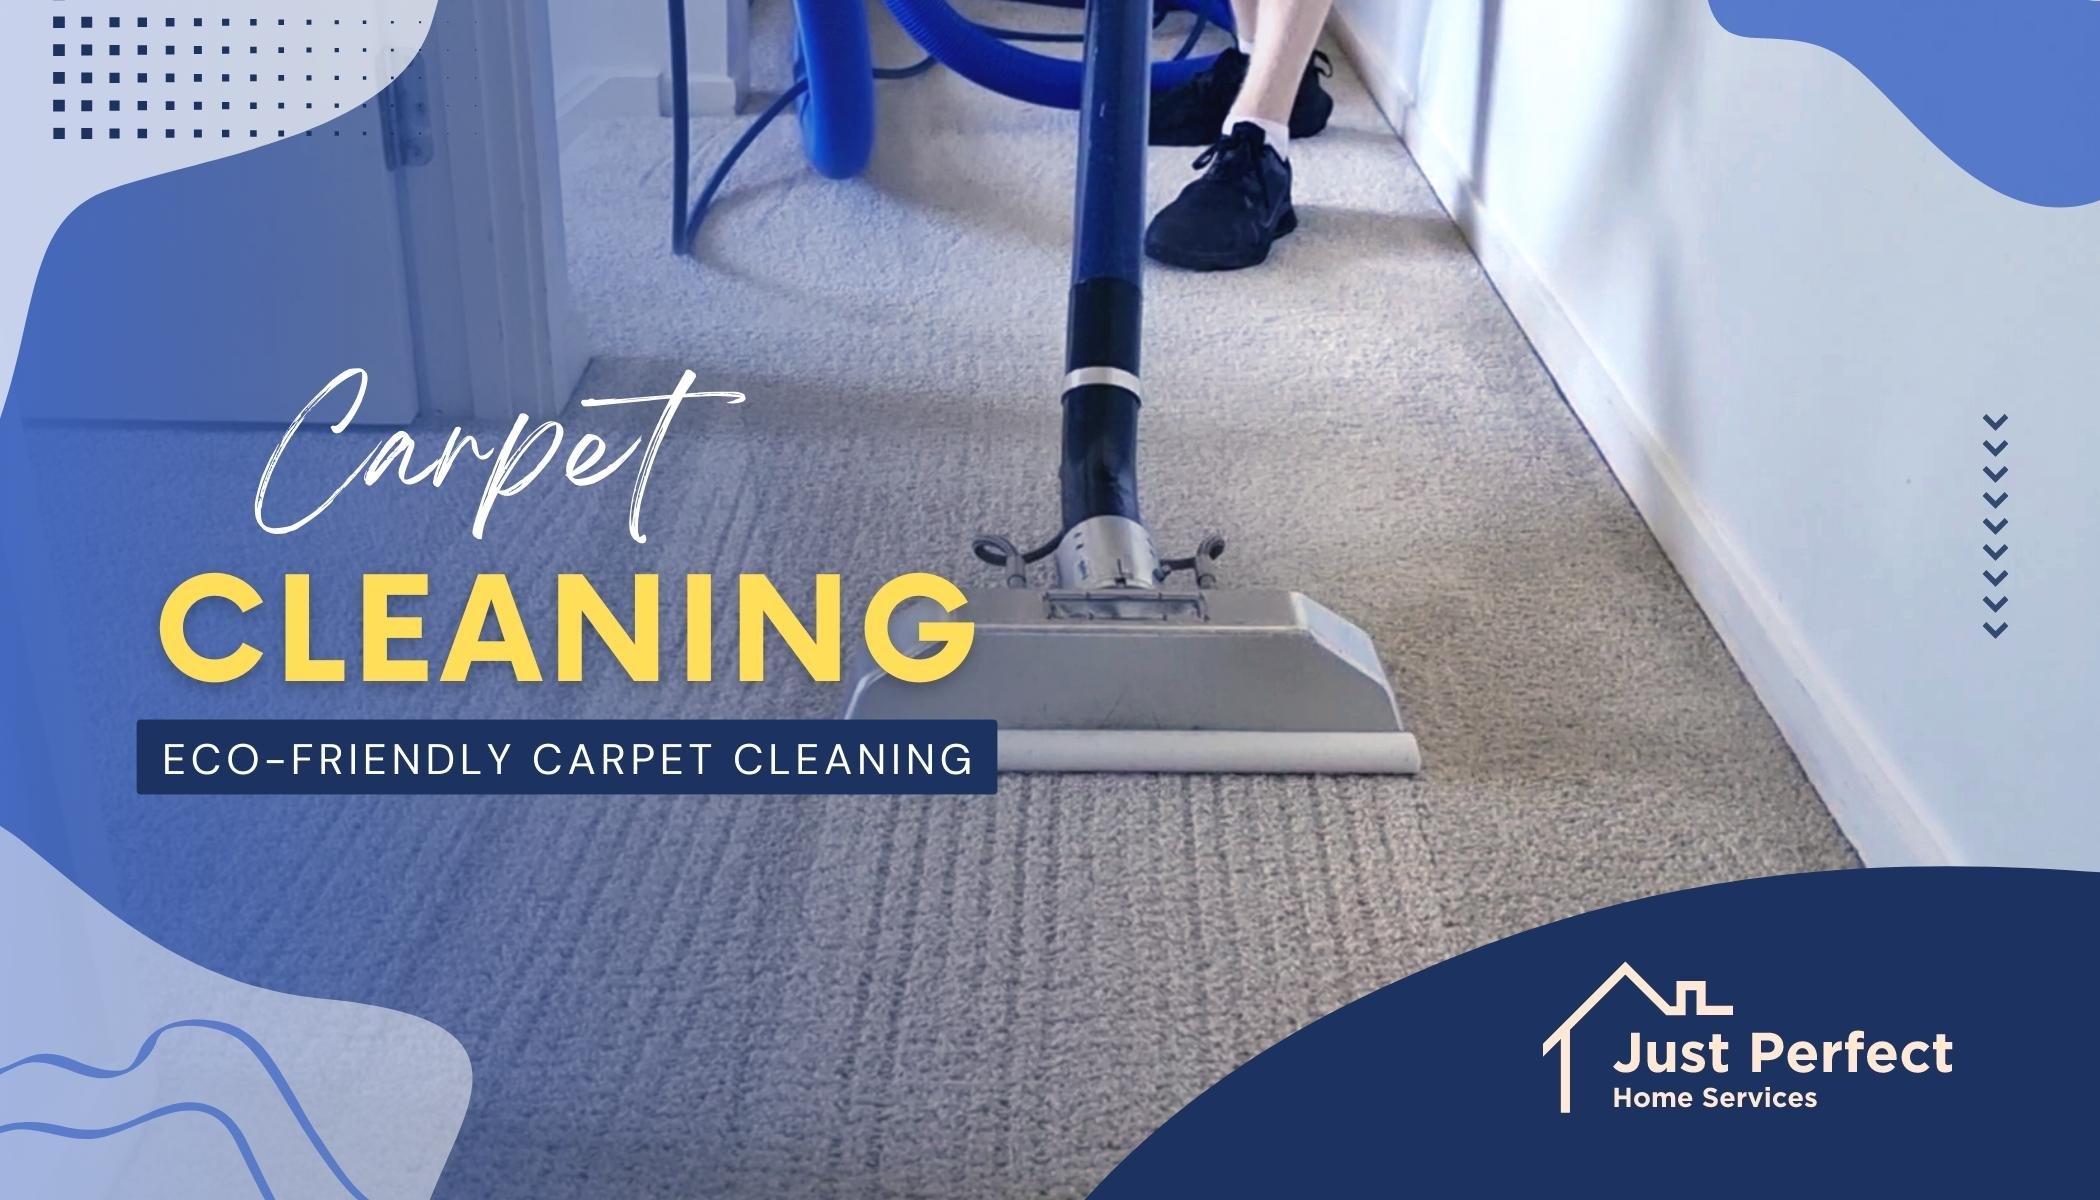 Just Perfect Home Services Carpet Cleaning cover